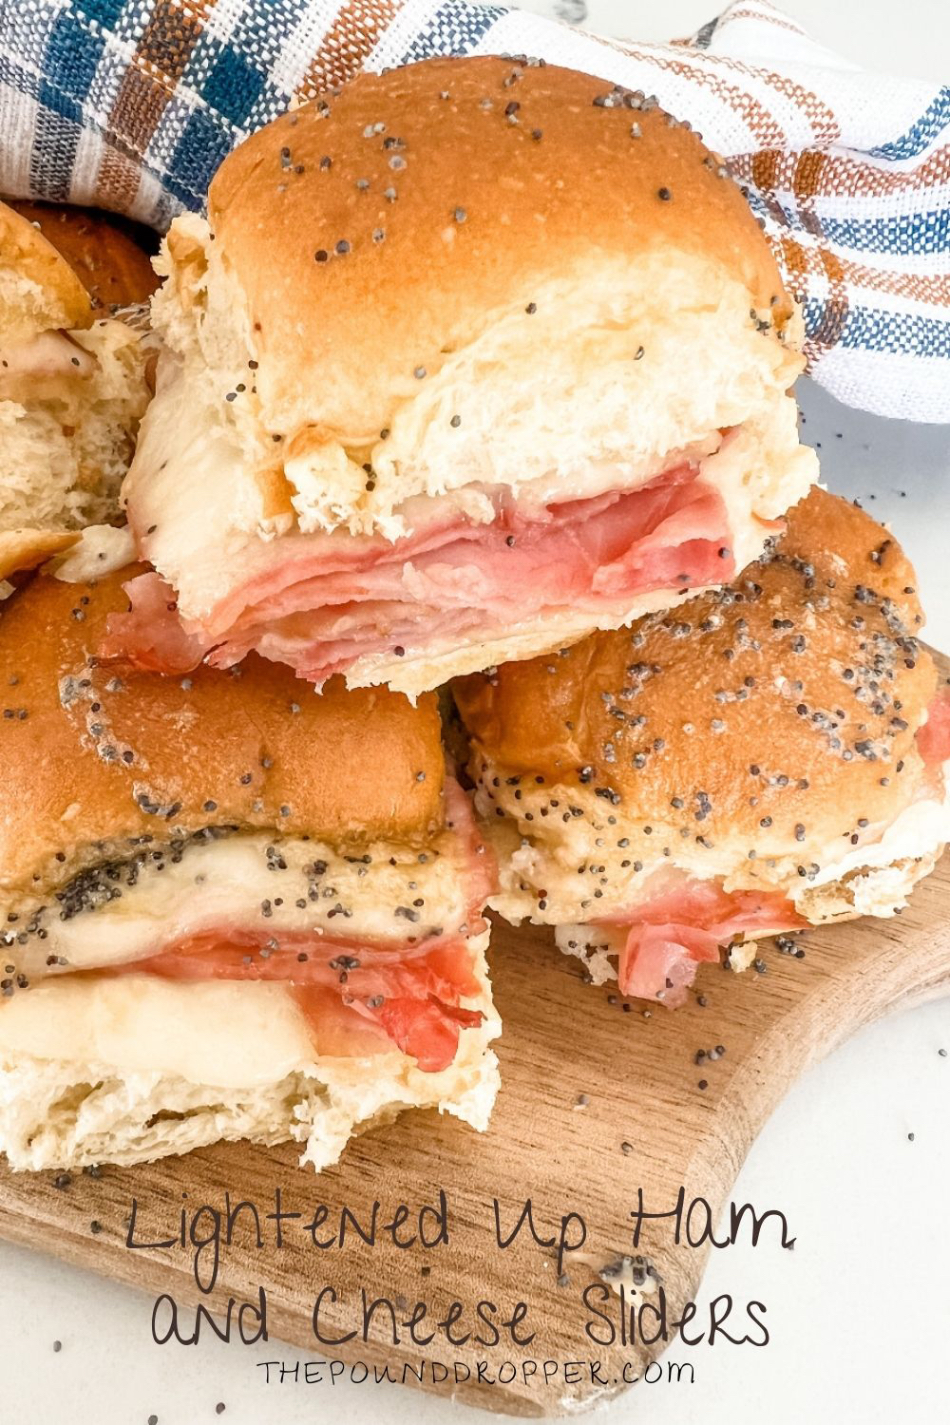 Lightened Up Ham and Cheese Sliders via @pounddropper